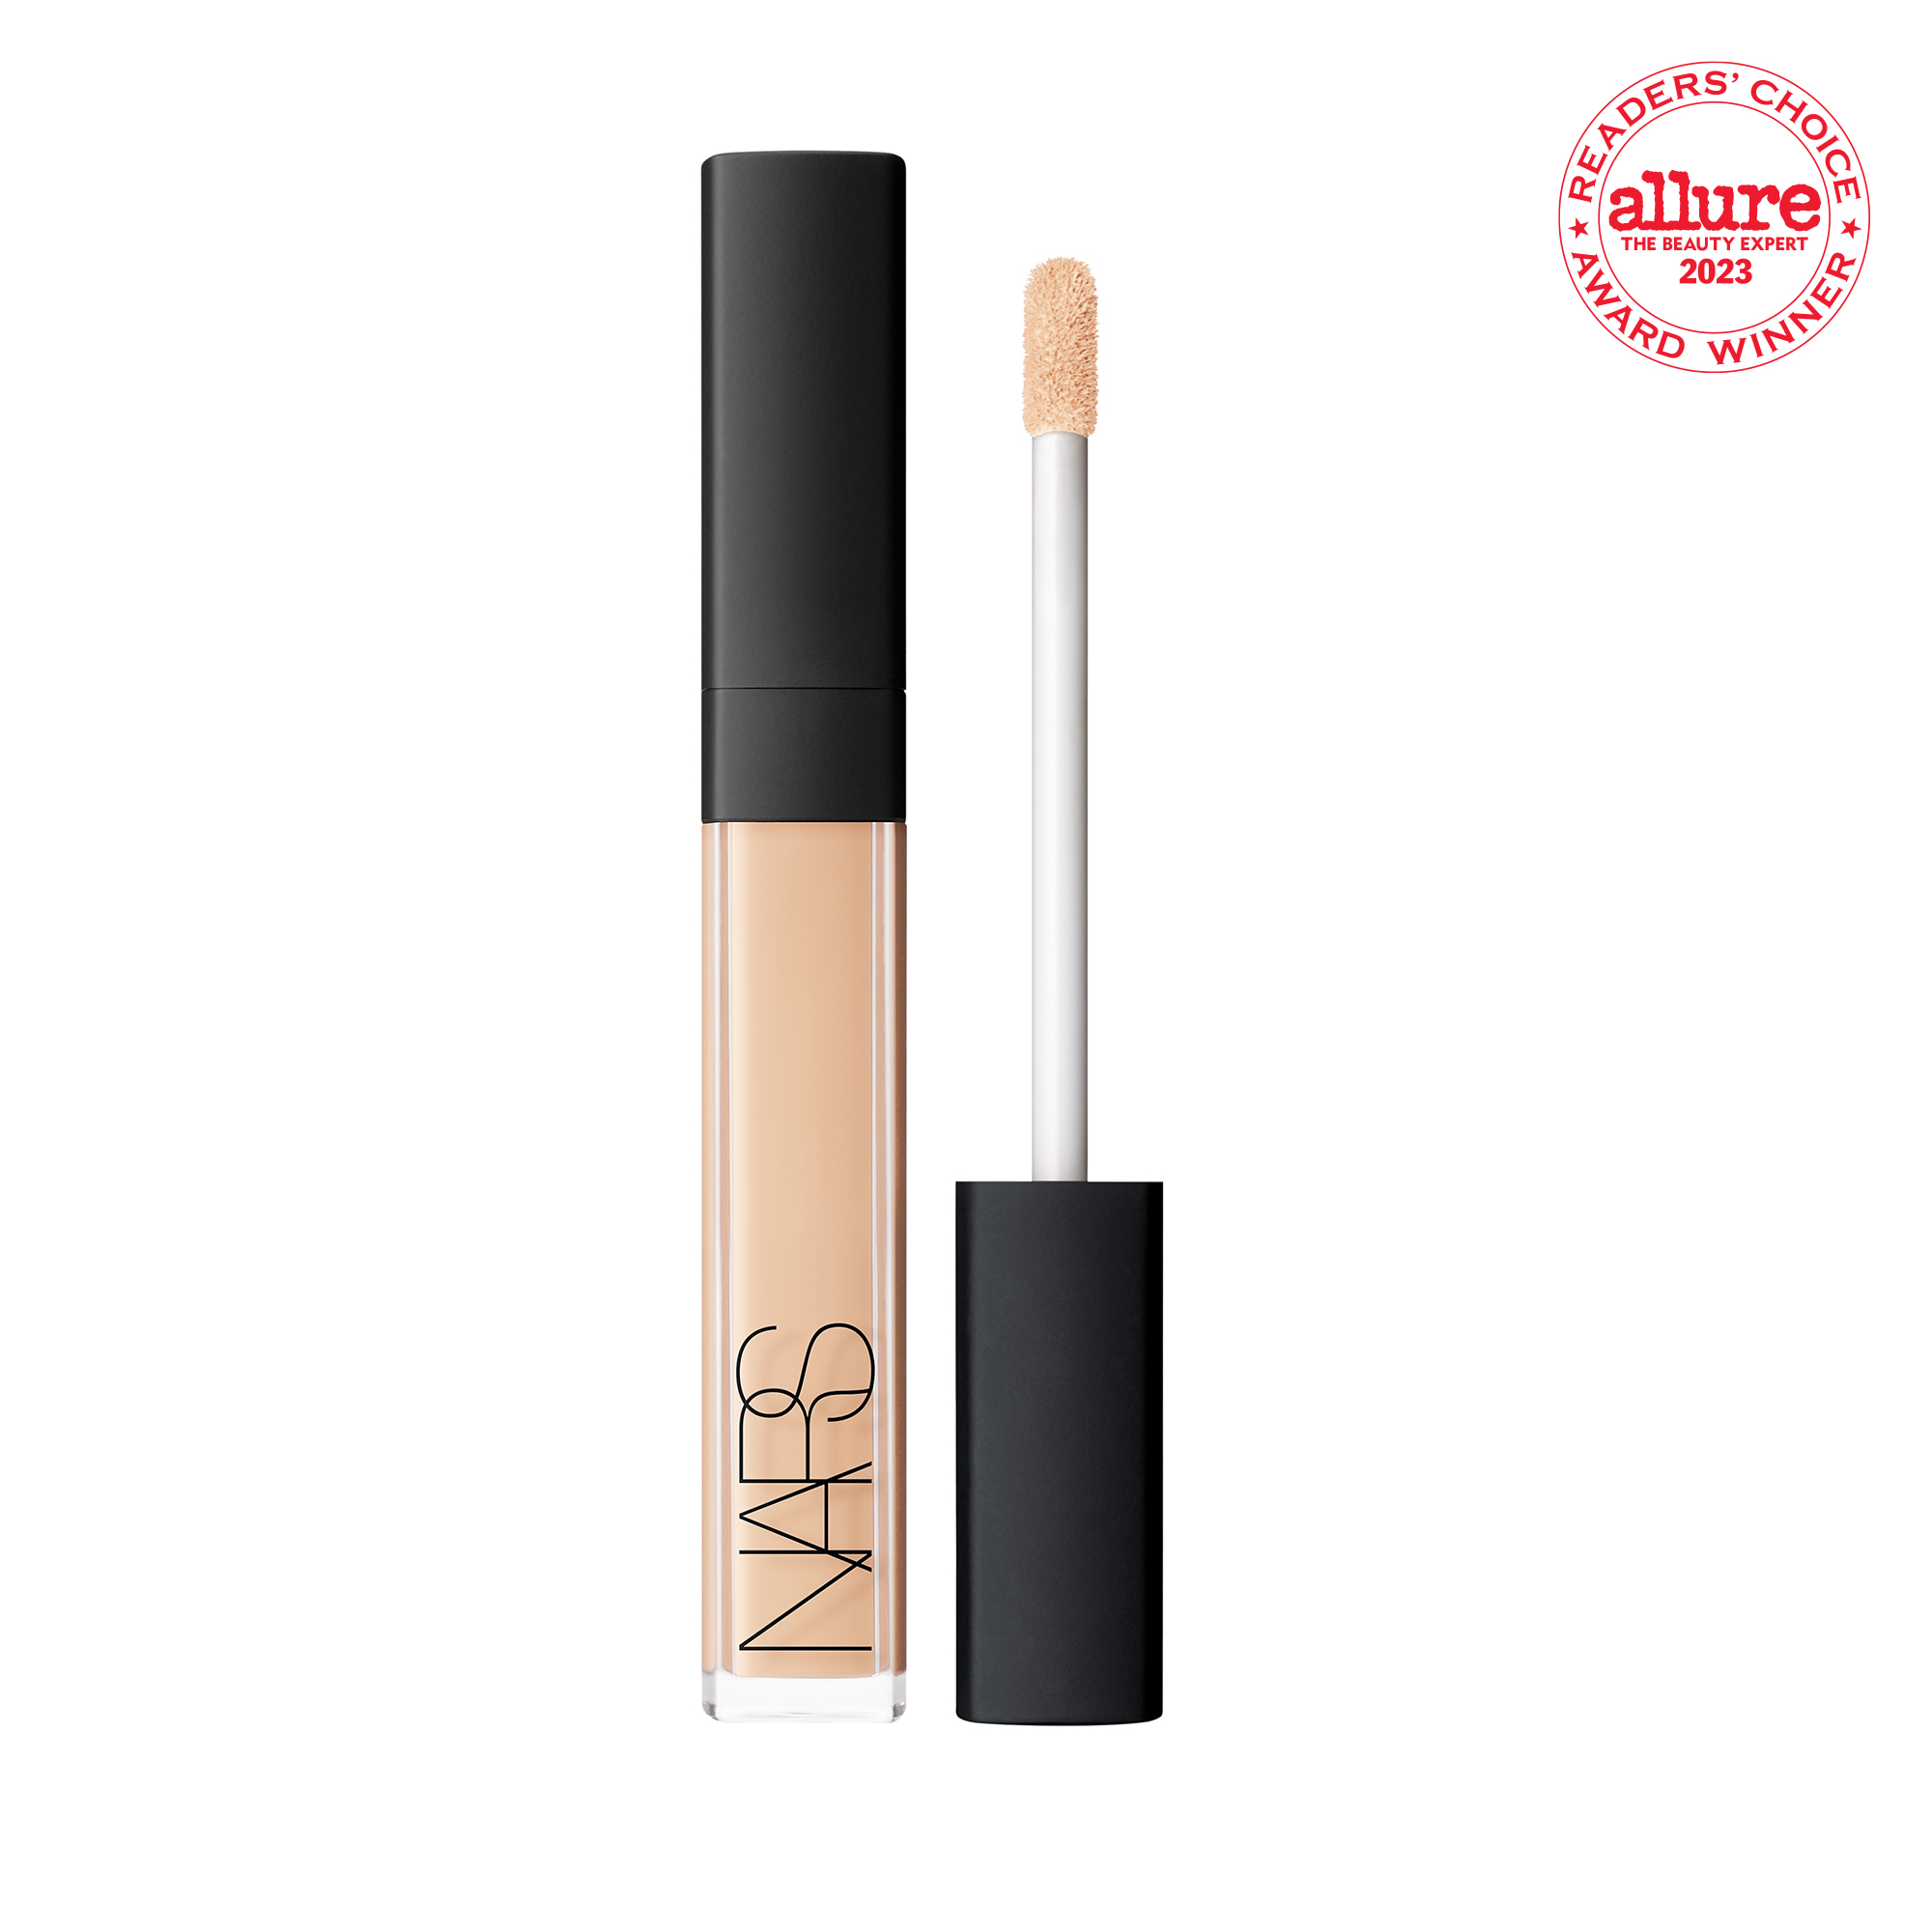 2022 Upgrade Cream Contour Stick with Built-In Brush,3 In 1 Concealer  Bronzer Foundation Stick,Face Brightens Shades Contour Pen,Travel-friendly